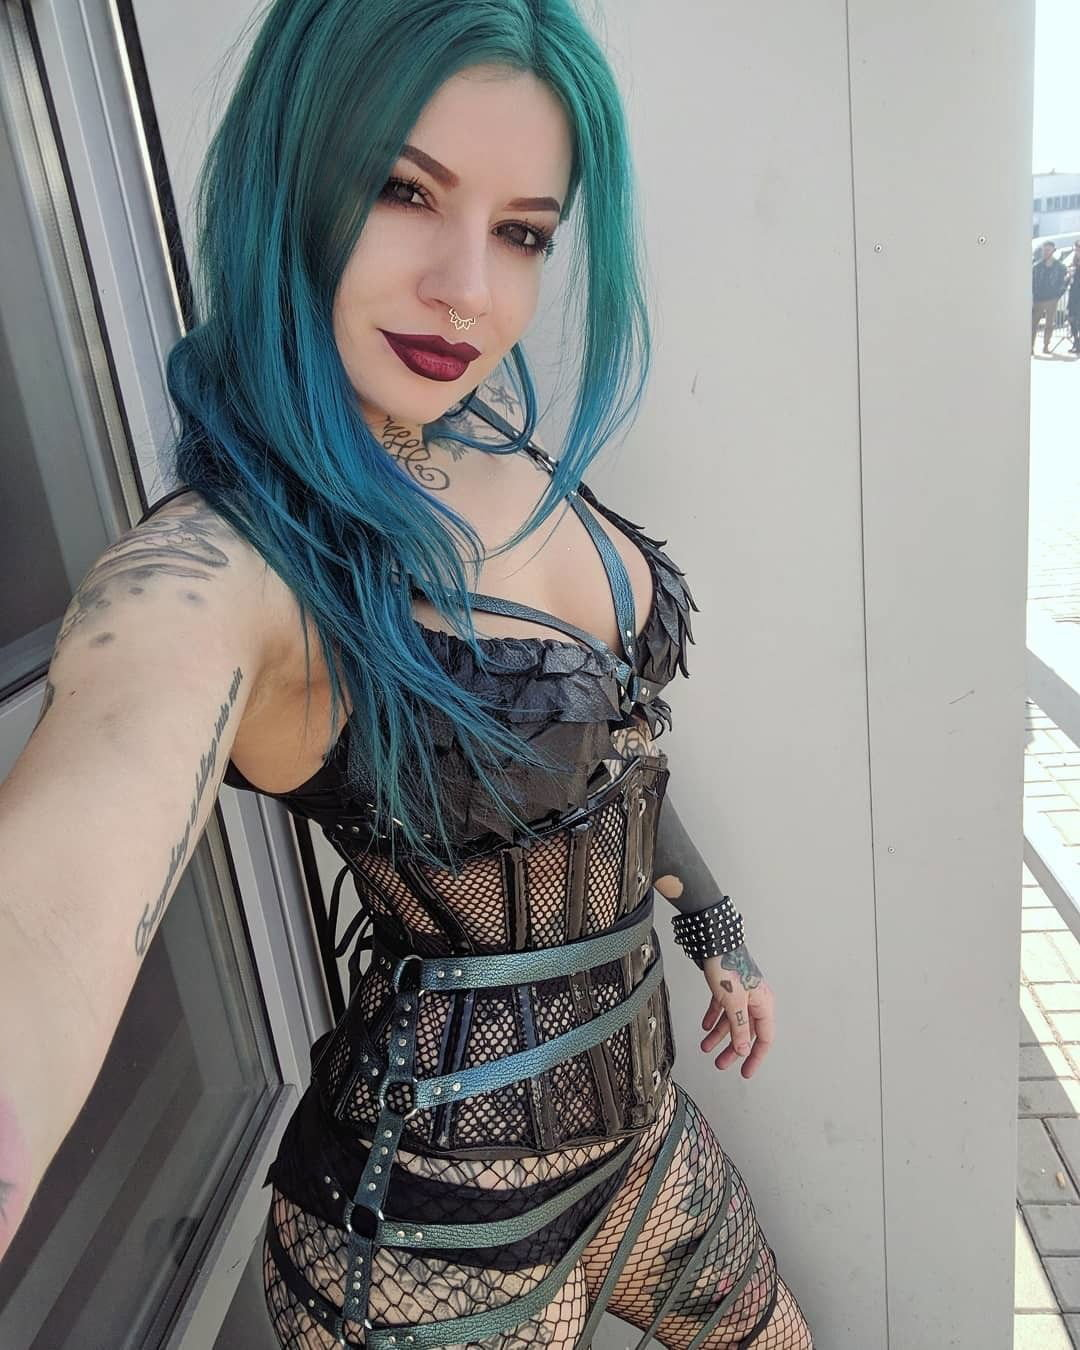 Photo by Devynsdogg with the username @Devynsdogg,  April 6, 2019 at 10:20 PM. The post is about the topic Fetish and the text says 'Usually these girls don't come out in the sunlight. #bdsm #bdsmfemdomgirl #sexylingerie #tattoo #babes #sexyfemales #beautifulgirls #neonhair..'